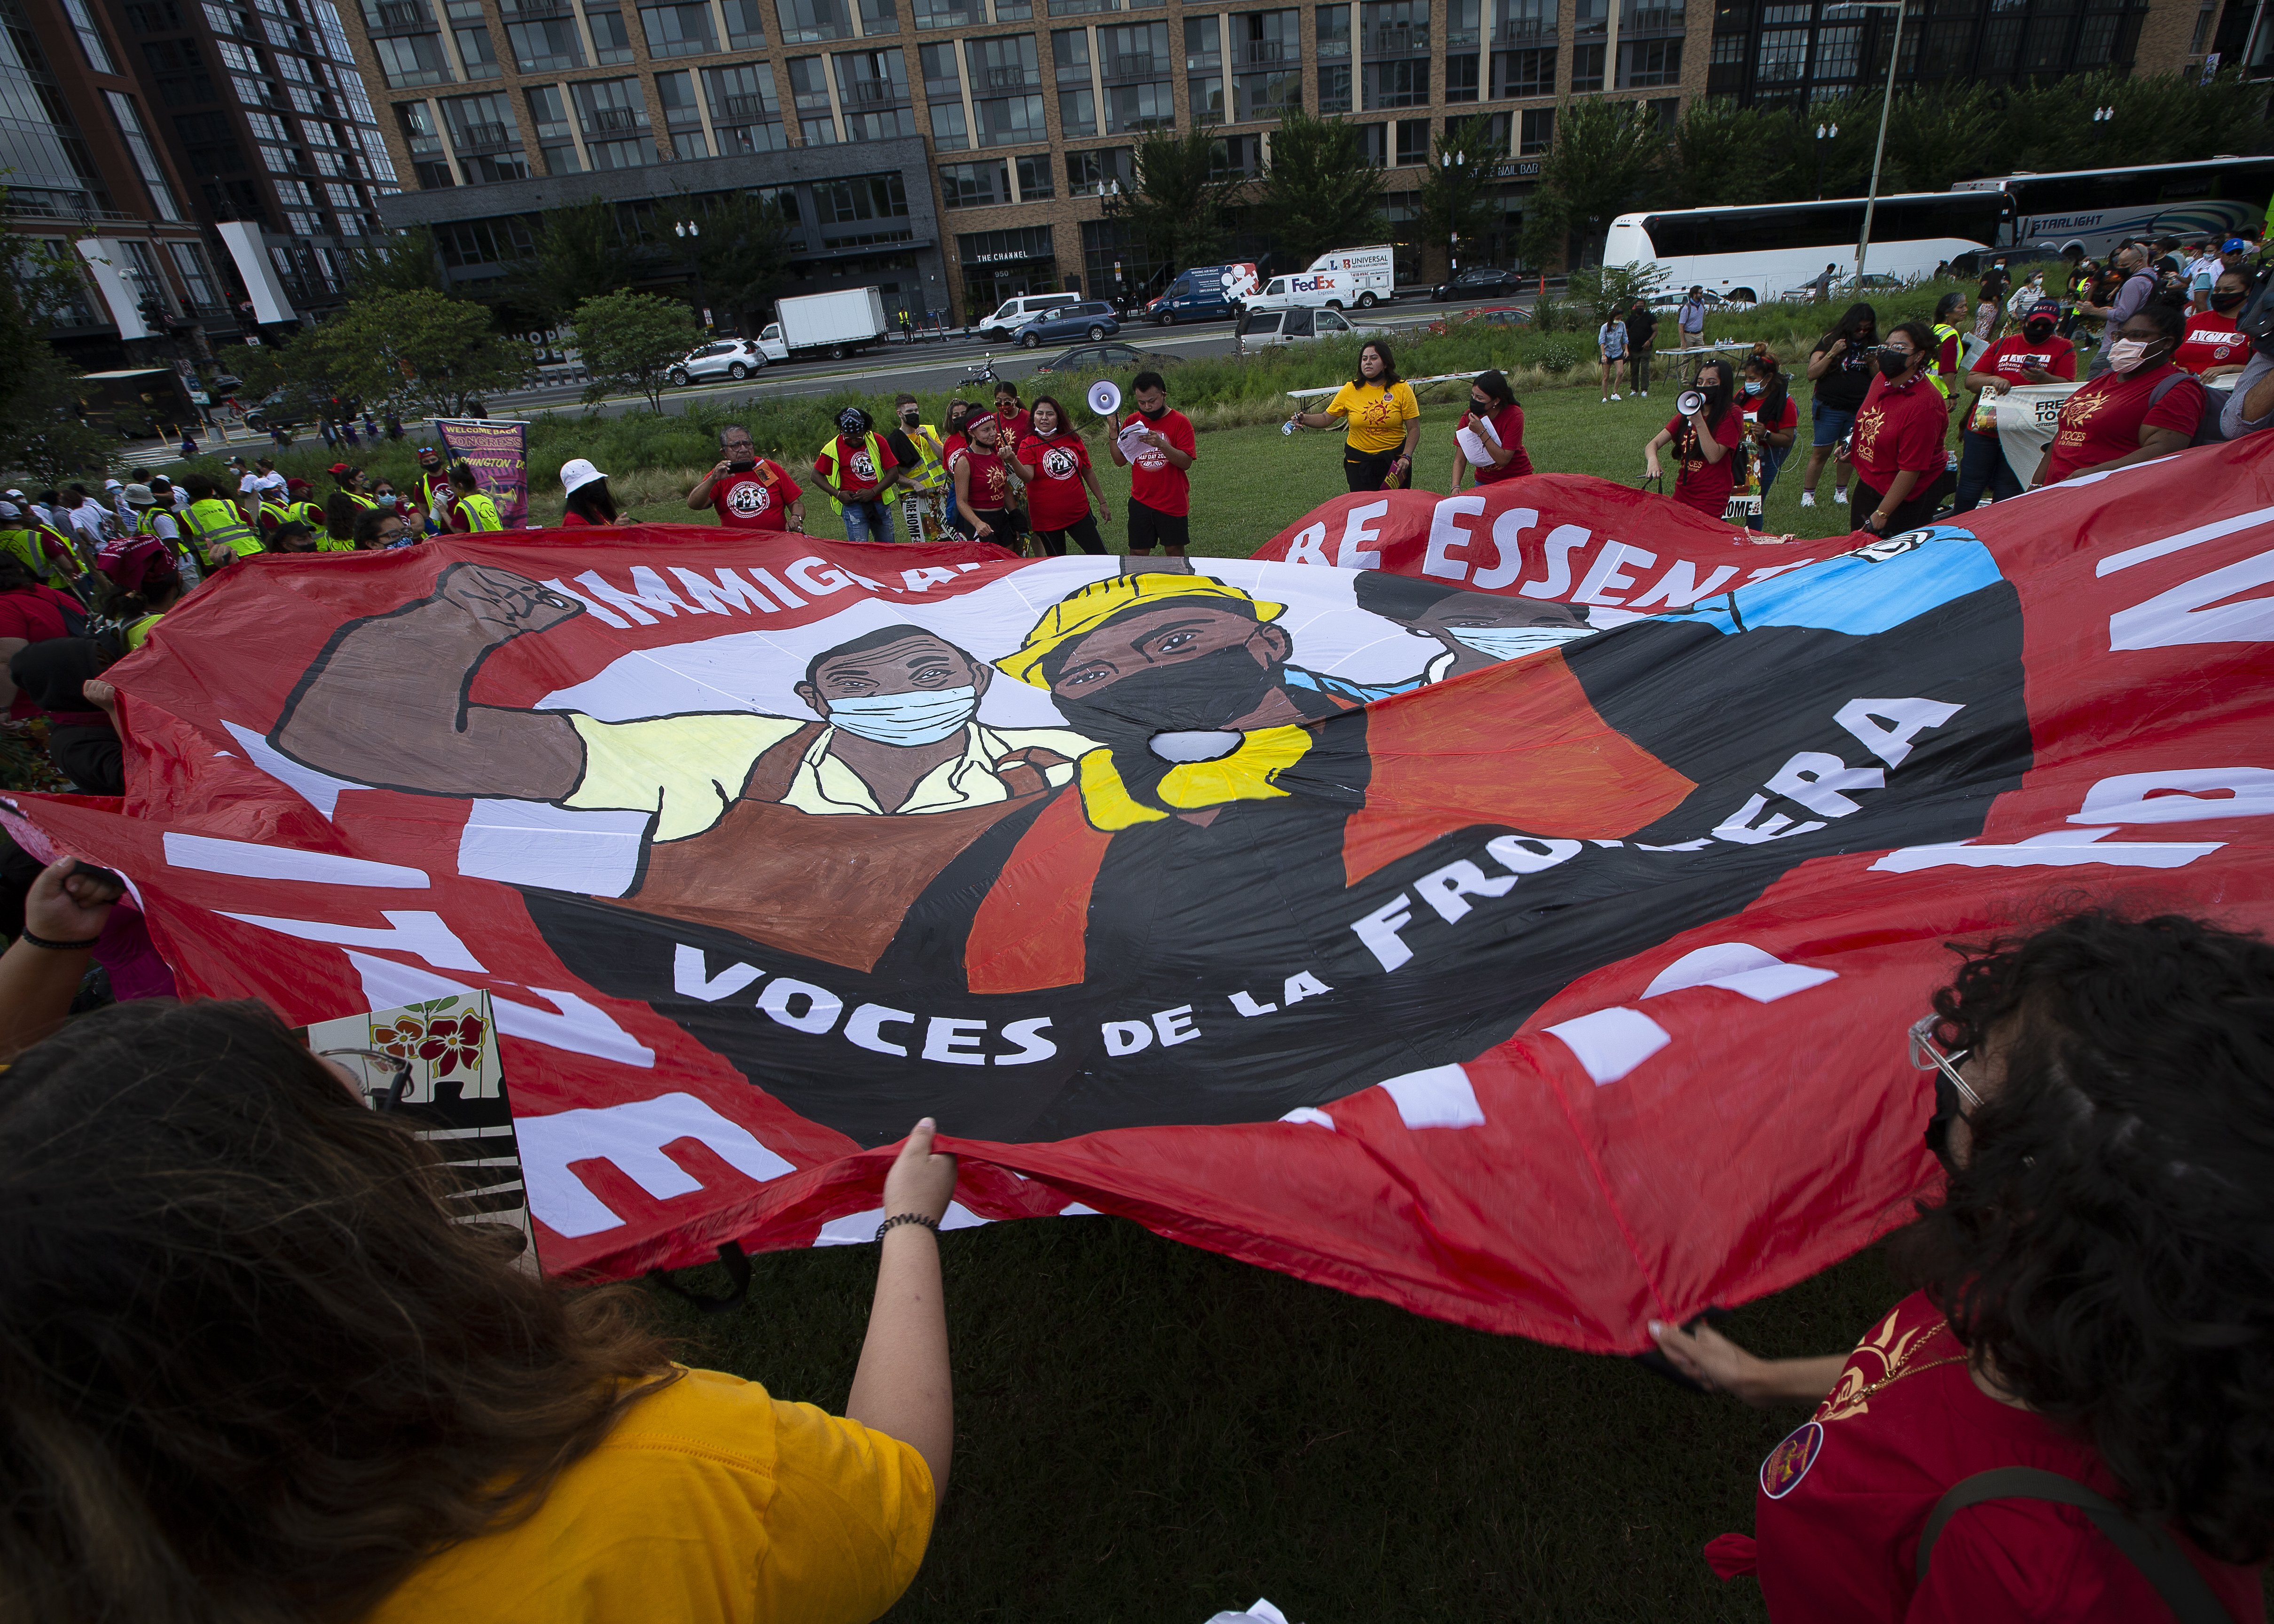 Migrant families and immigration advocates in Washington call for a pathway toward U.S. citizenship as they gather near Benjamin Banneker Park to march toward the U.S. Immigration and Customs Enforcement building Sept. 21, 2021. (CNS photo/Tyler Orsburn)